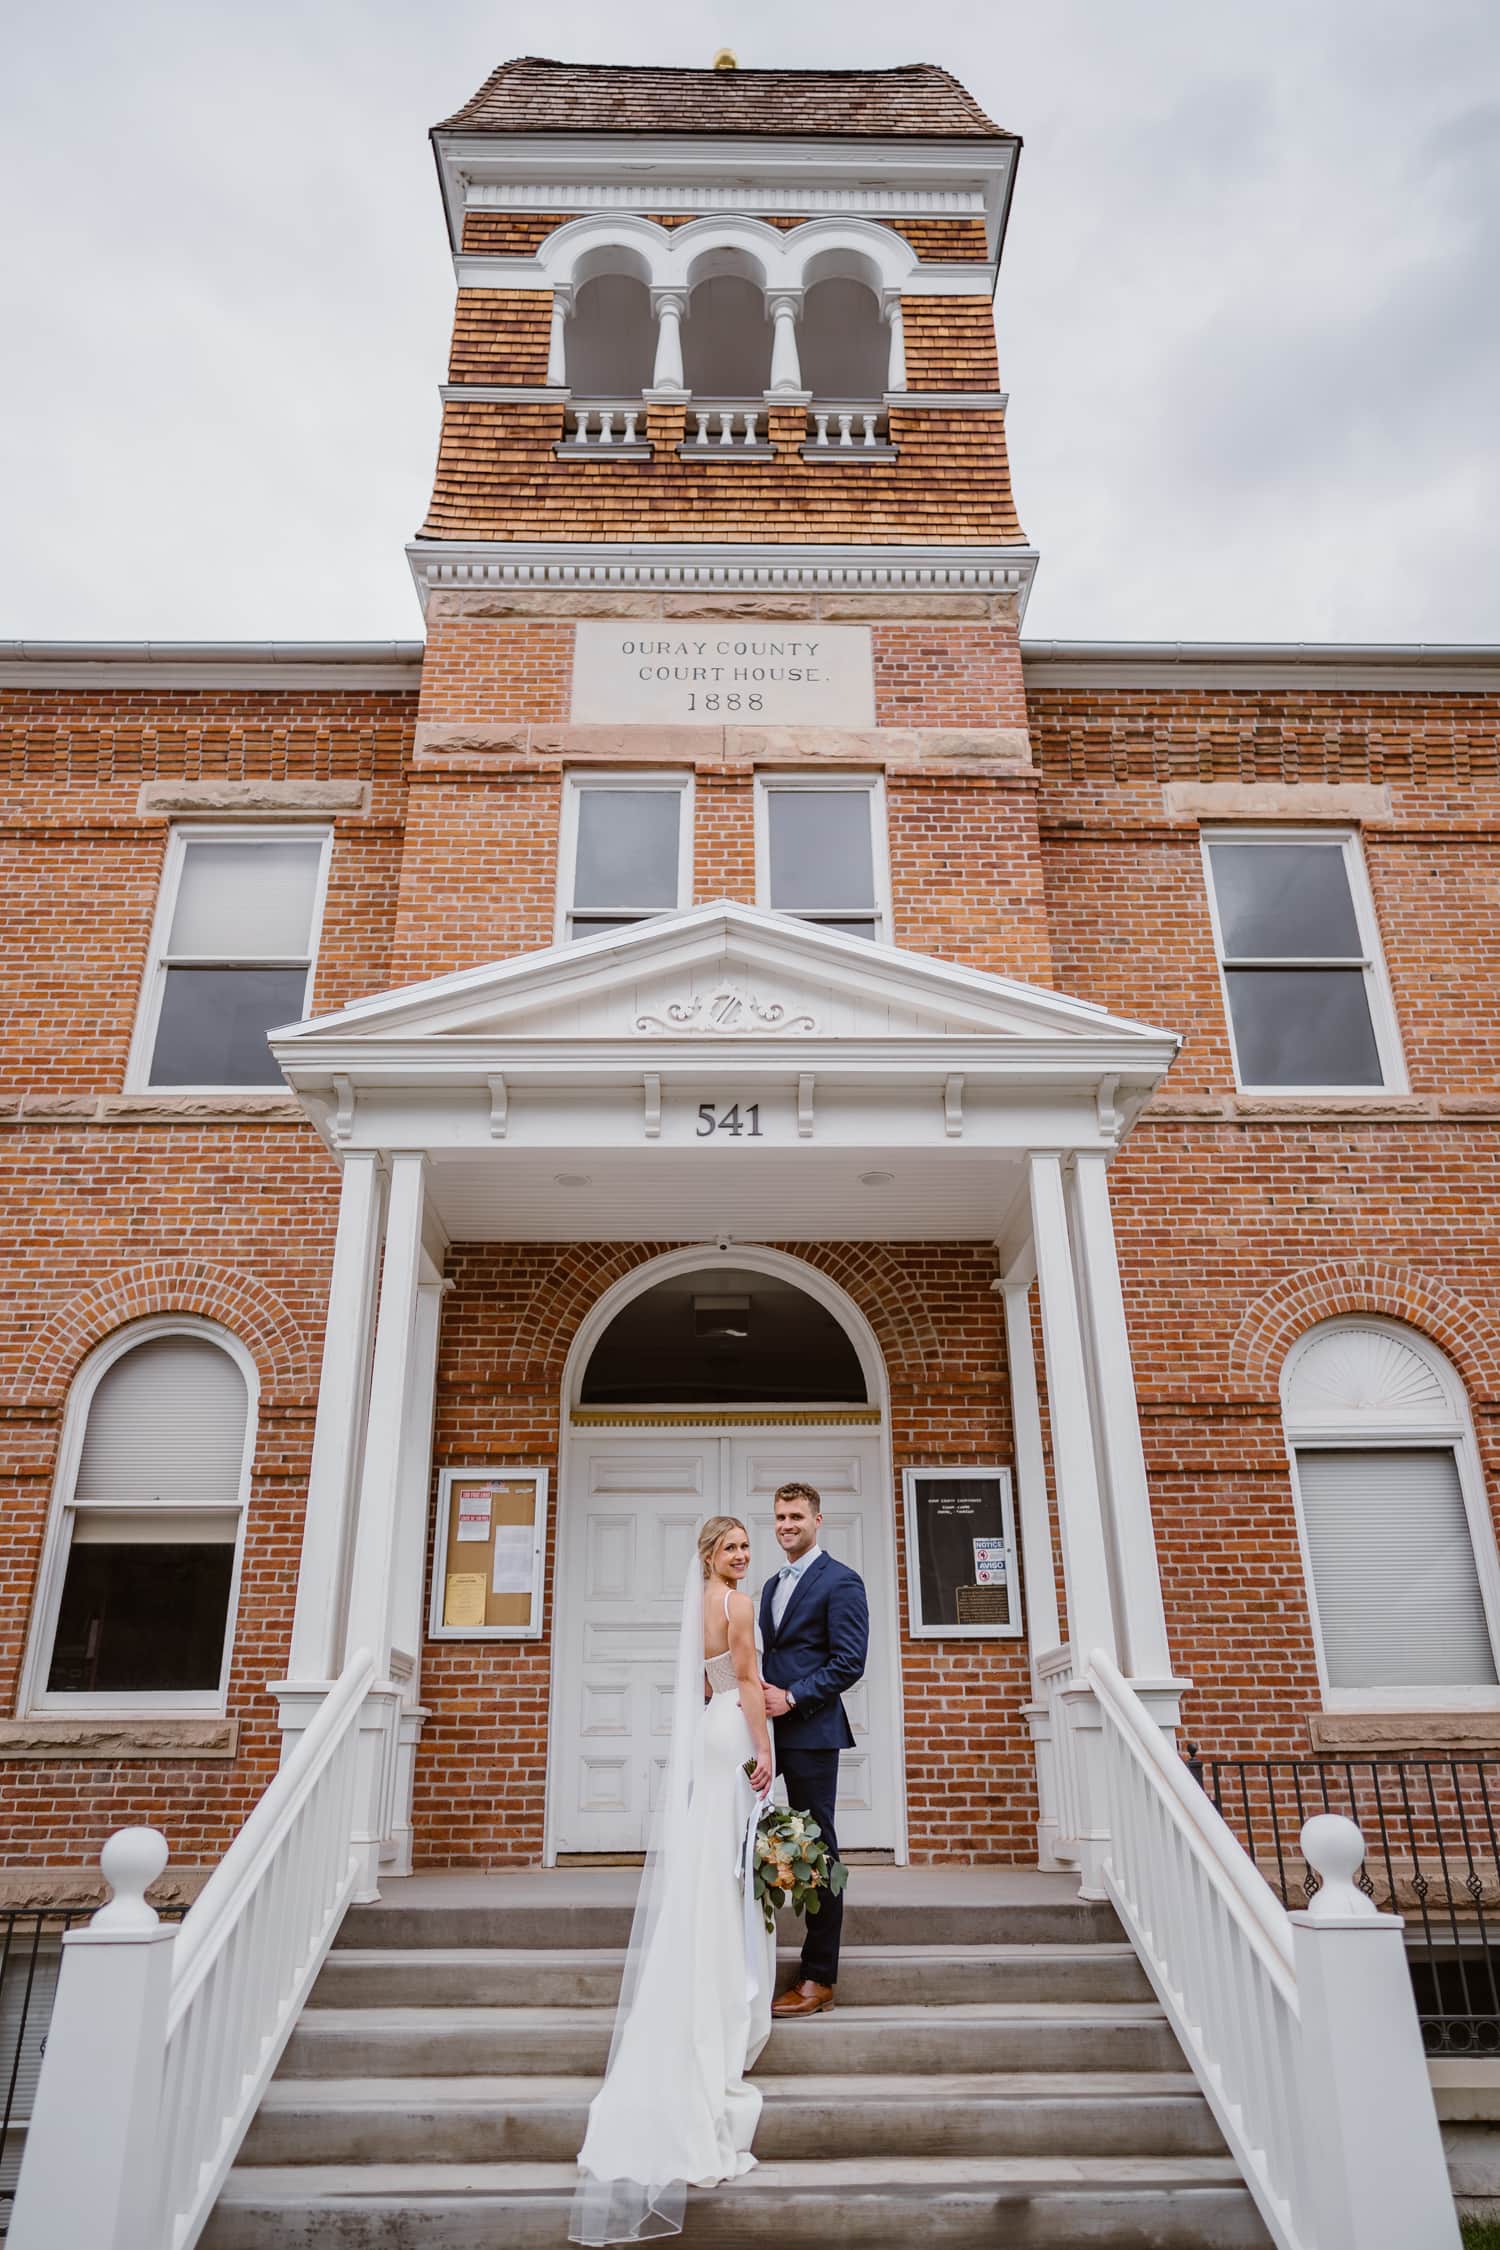 Couple posing on the courthouse steps in Ouray, Colorado.